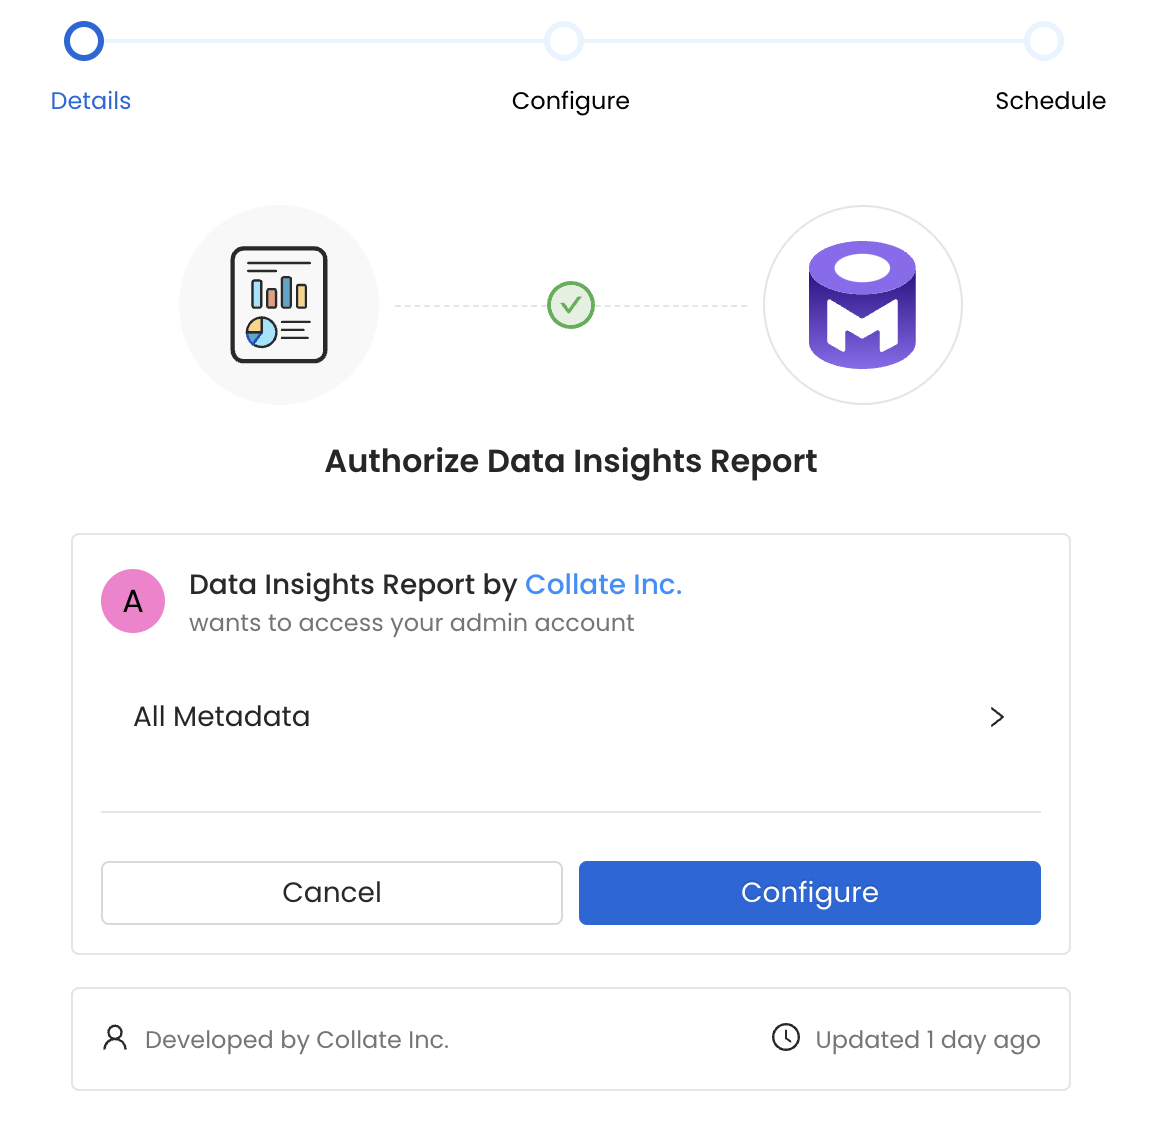 Configure the Data Insights Report